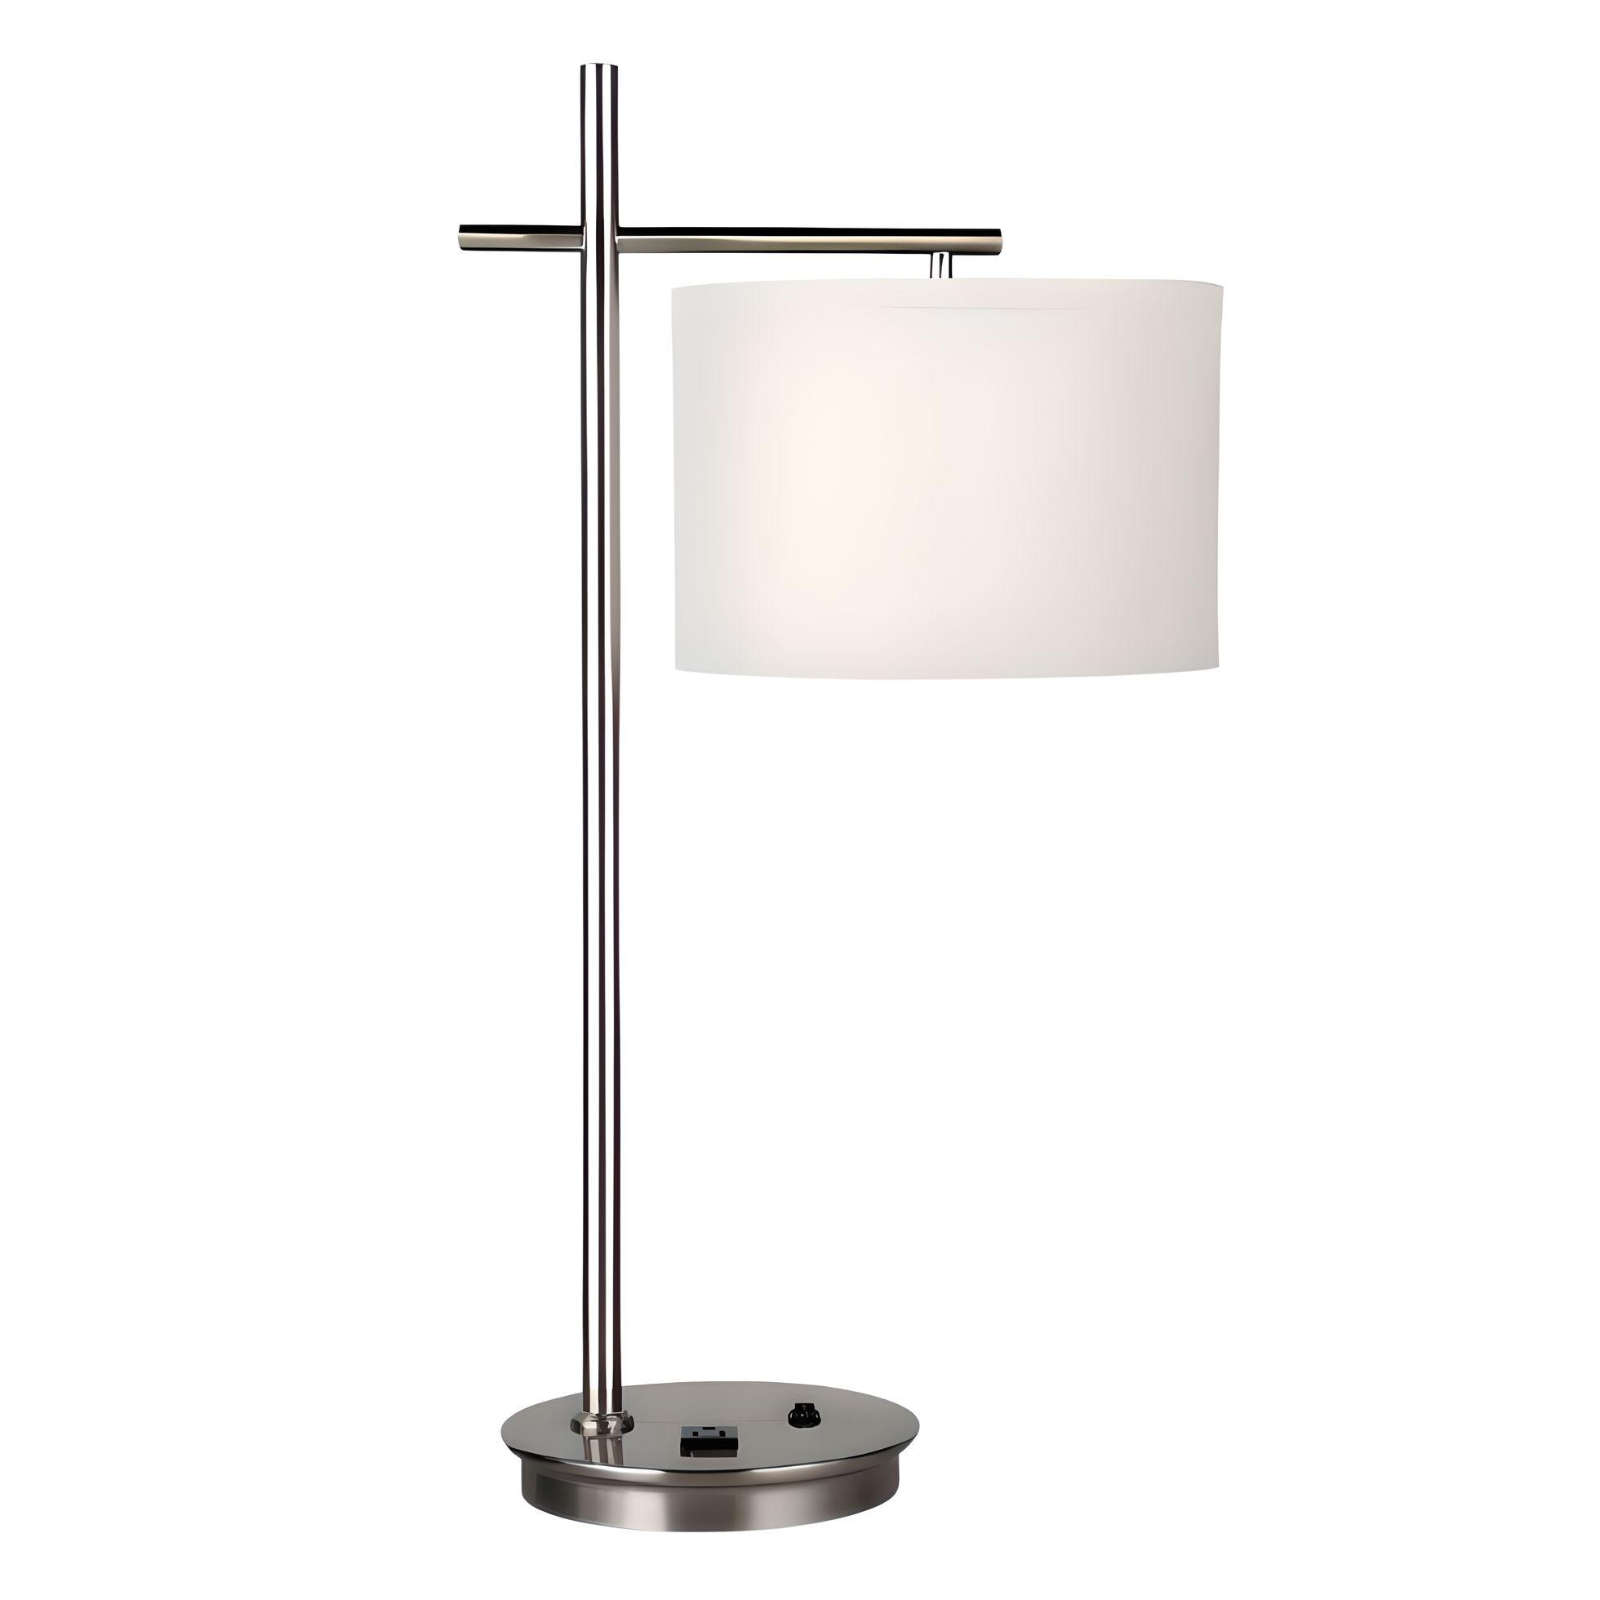 Astra Desk Table Lamps- Desk Table Lamps with brushed nickel finish and one convenience outlet - Eco LED Lightings 